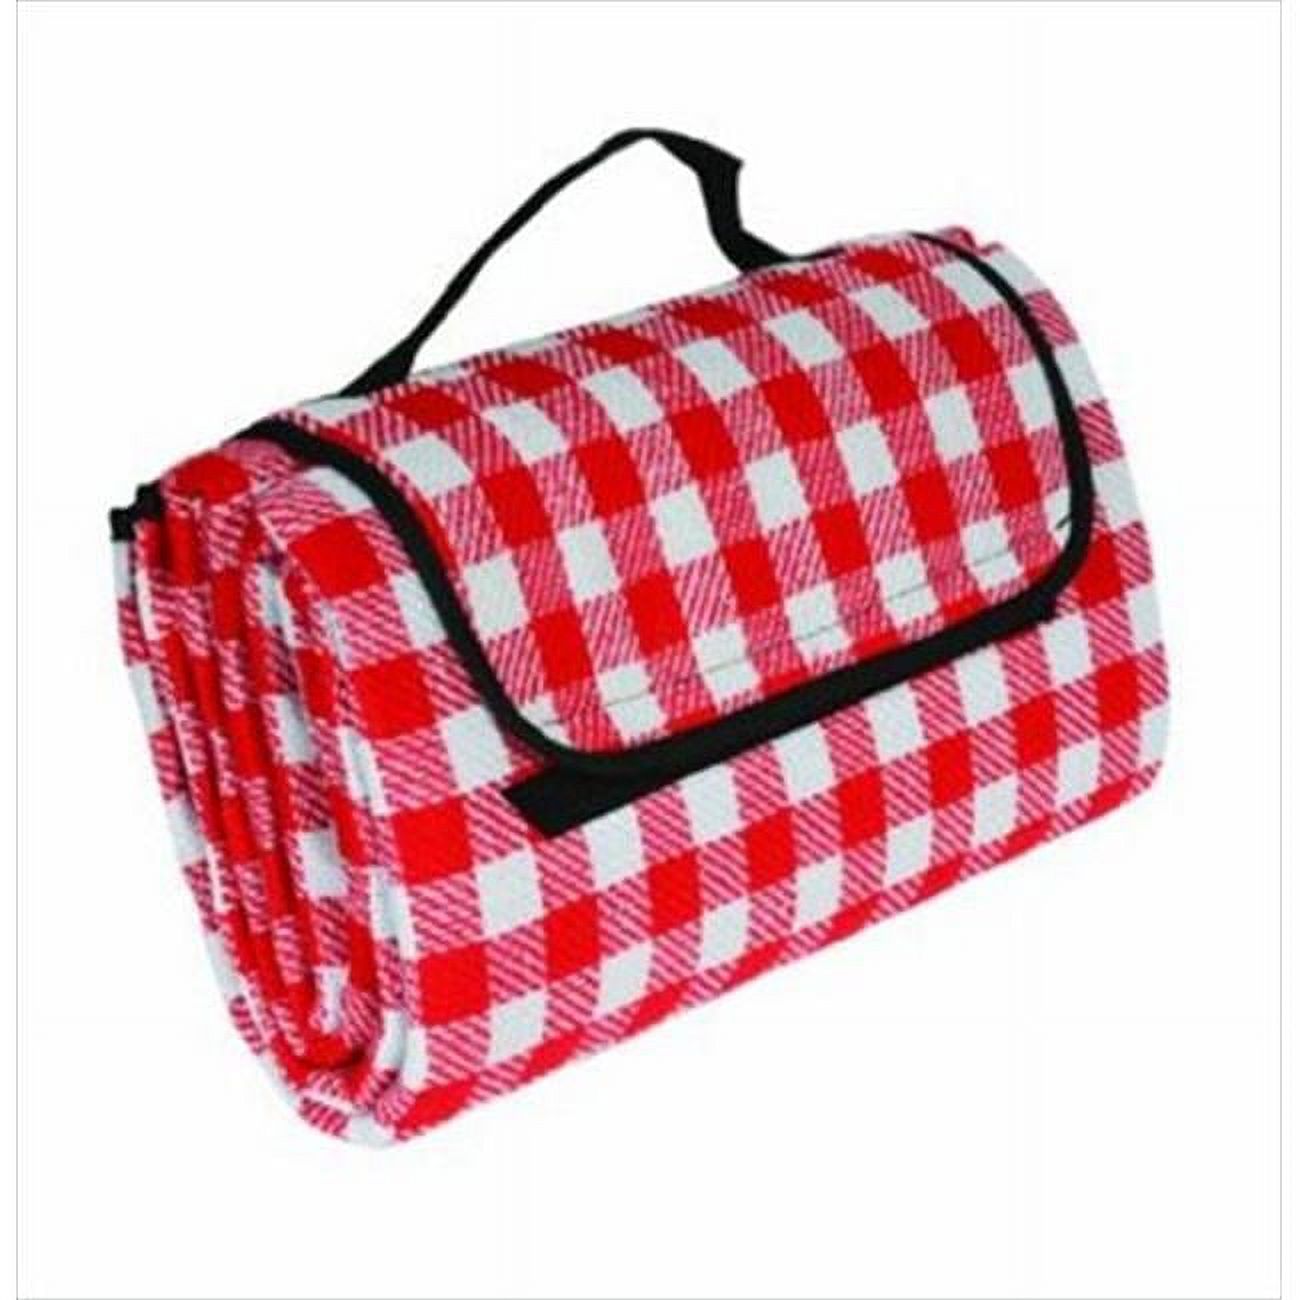 Camco 42801 Picnic Blanket Red White Checkered - image 1 of 1